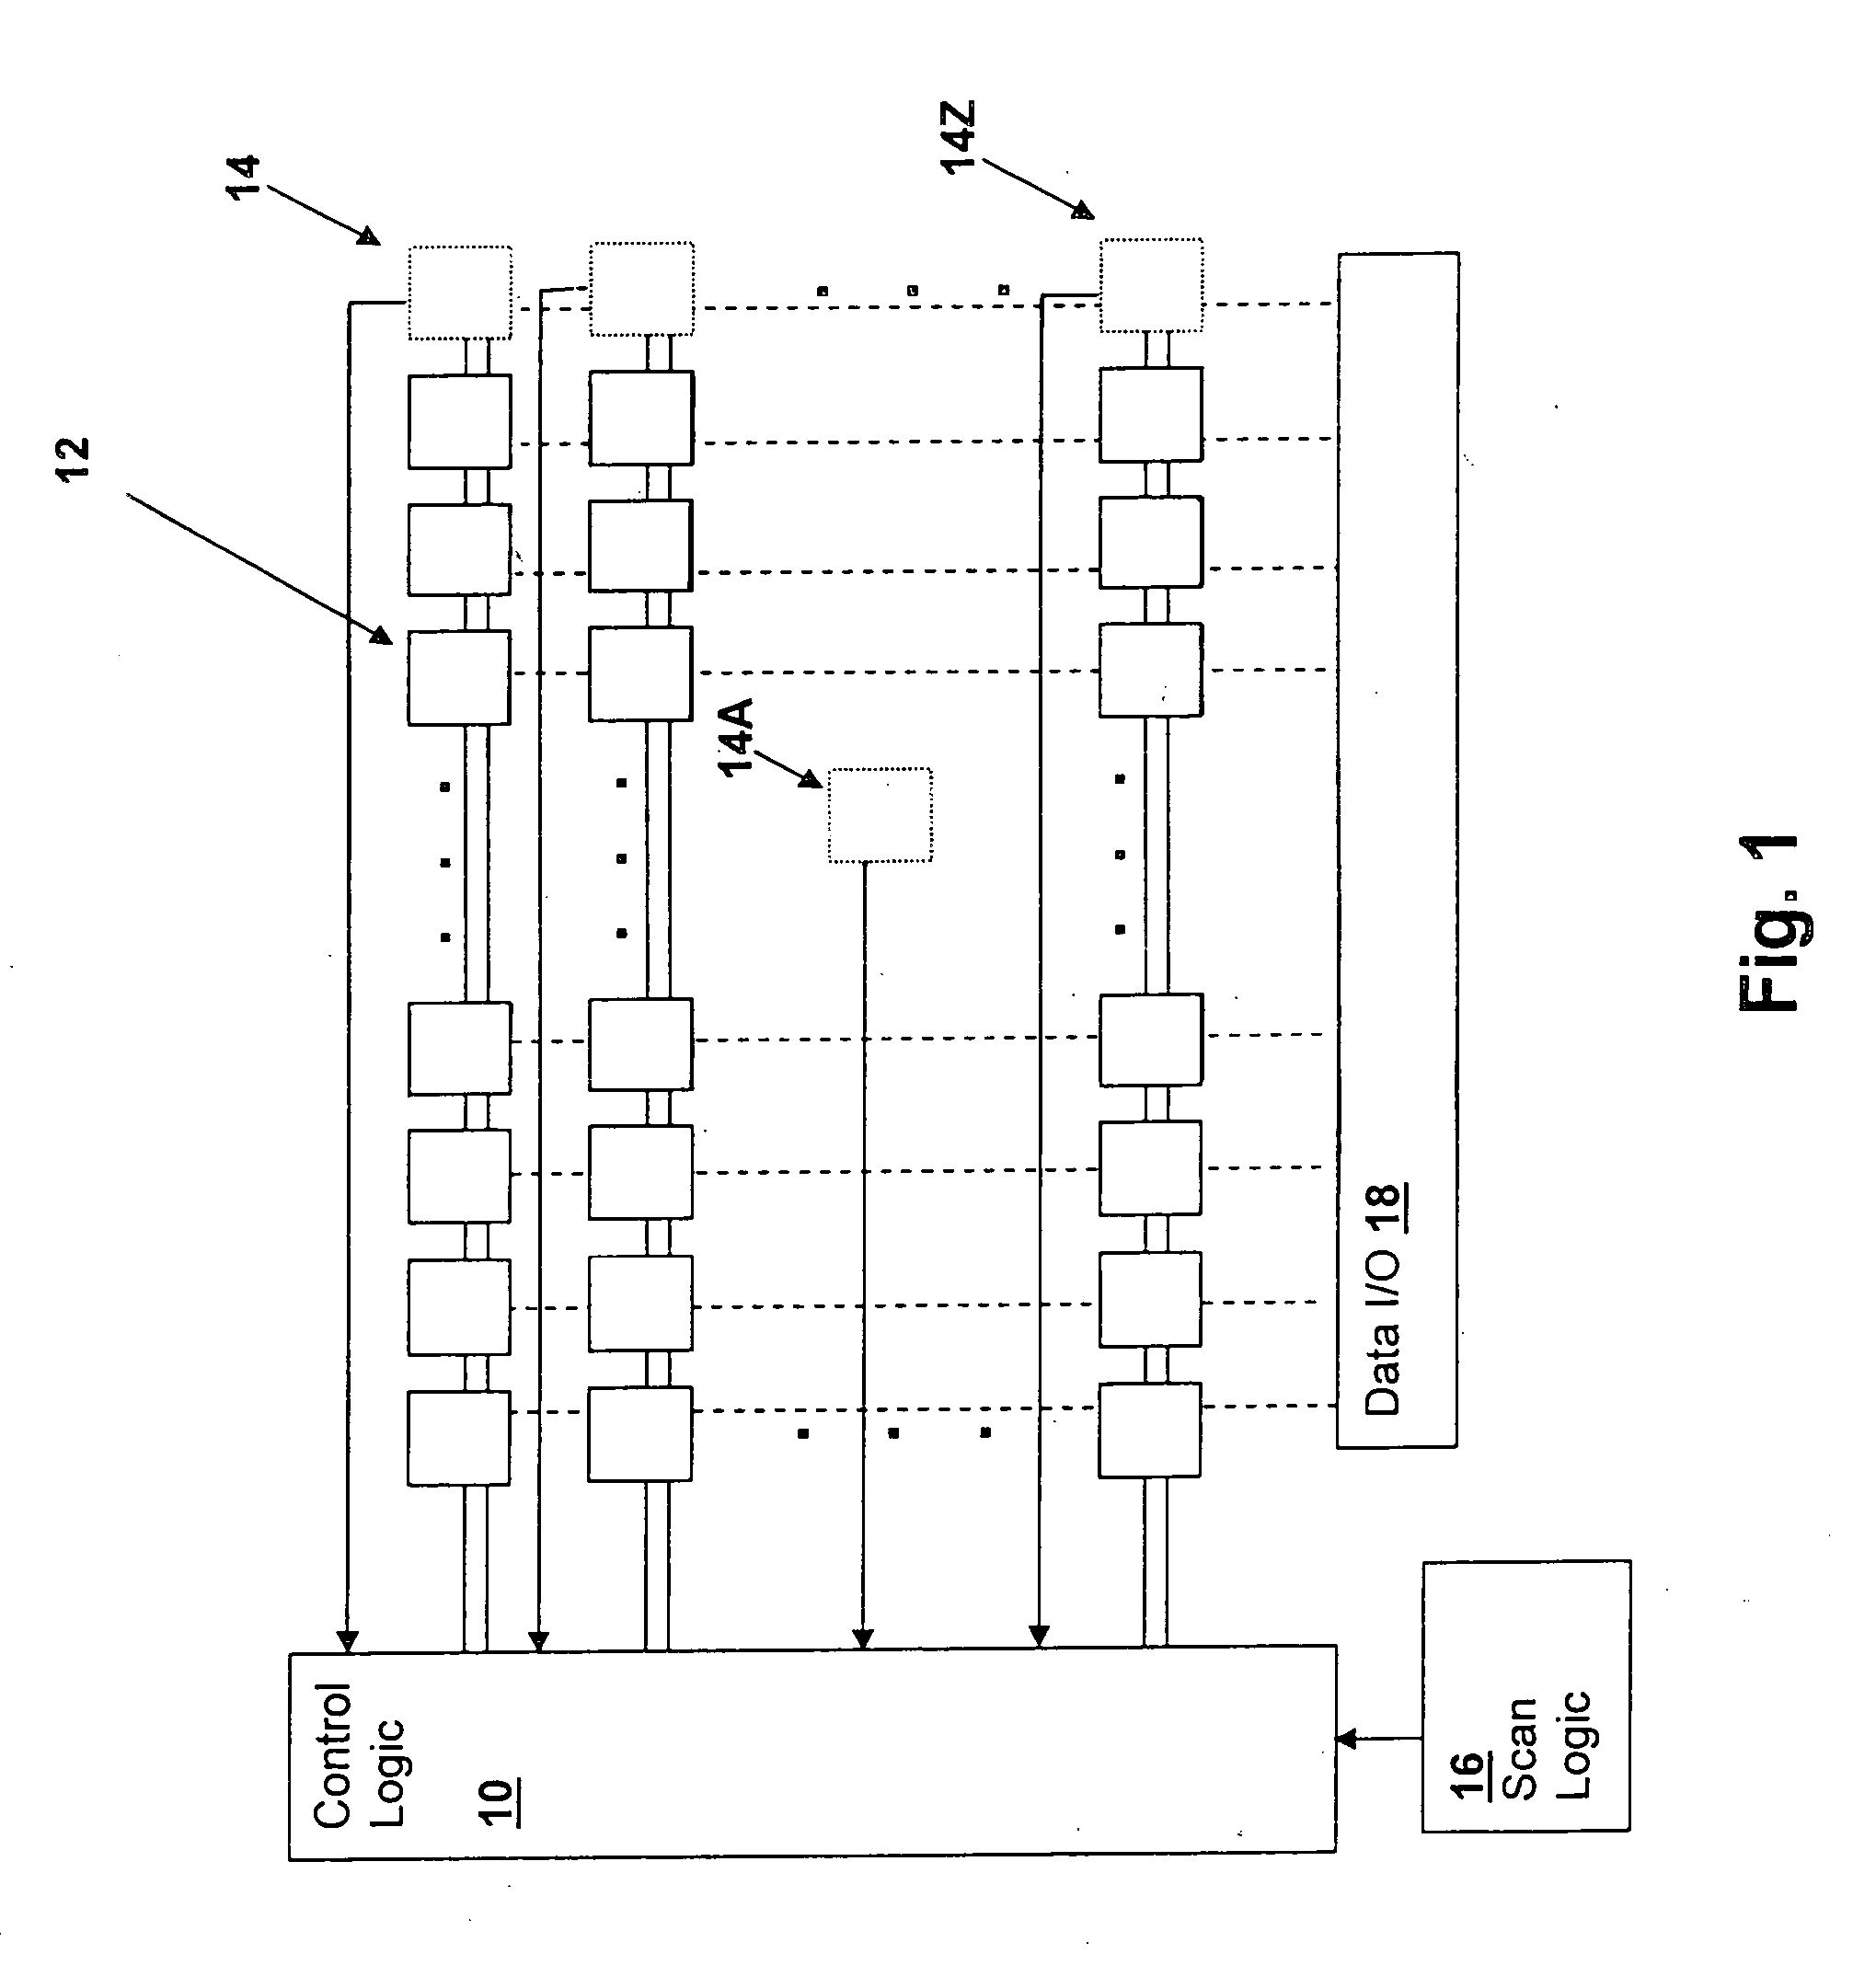 Register file apparatus and method incorporating read-after-write blocking using detection cells